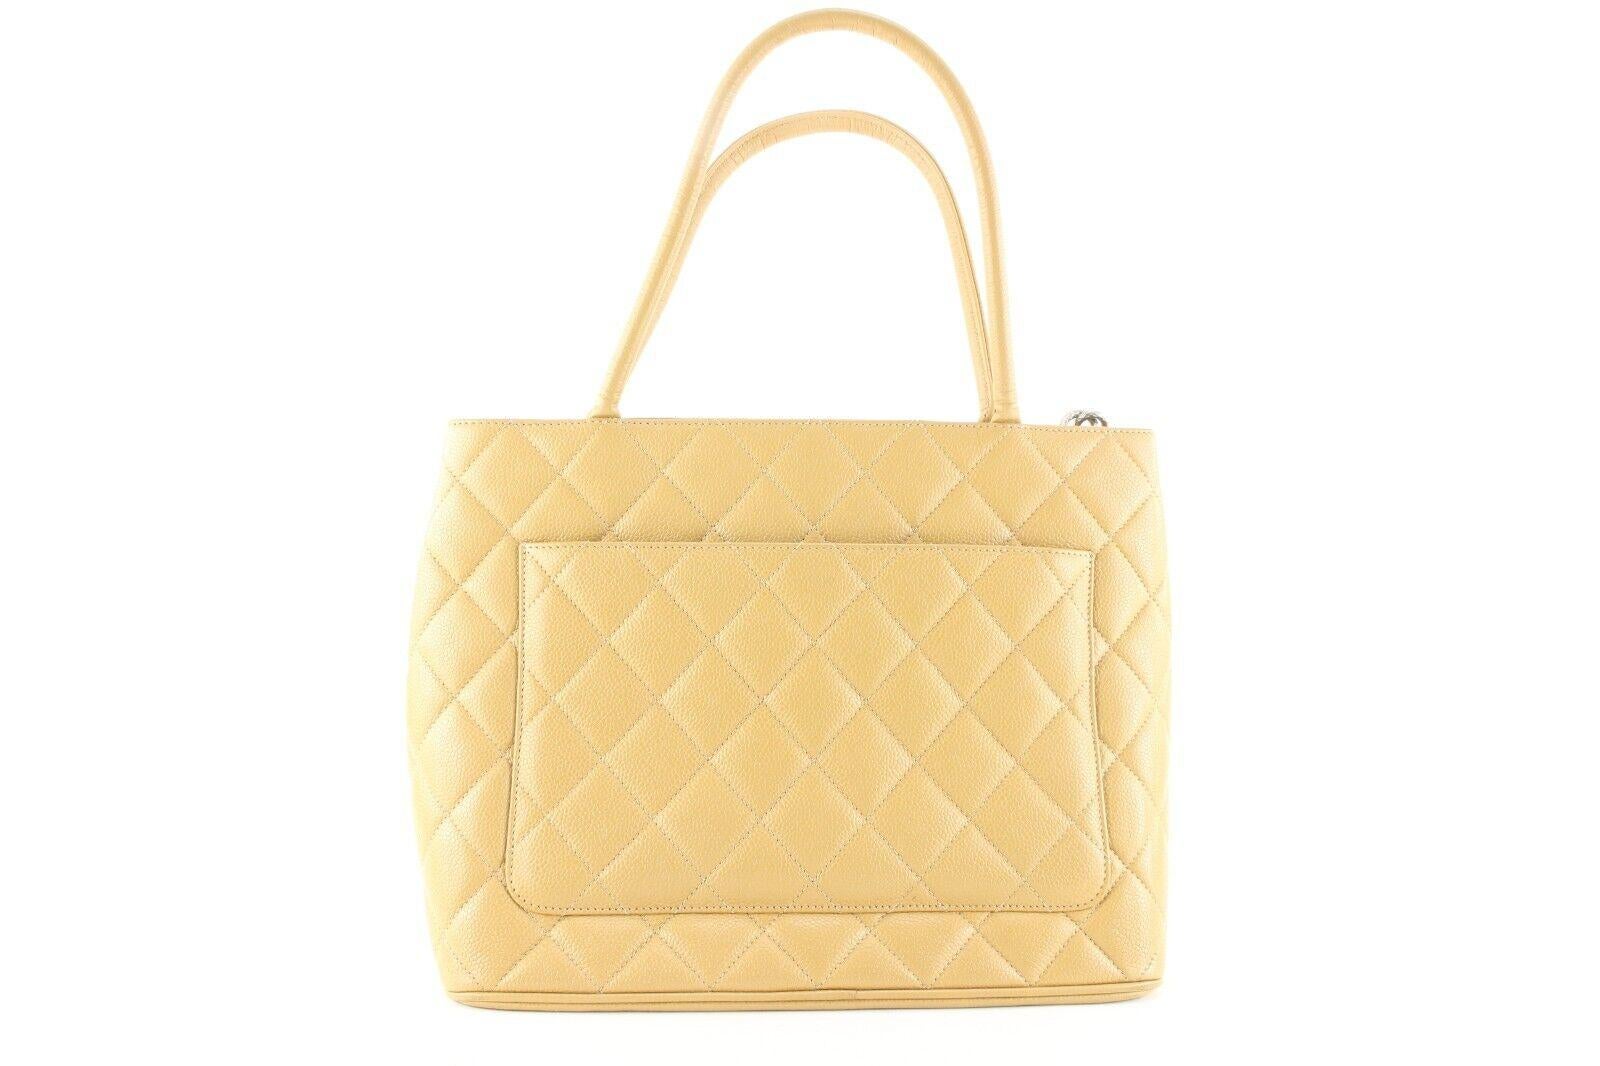 Chanel Beige Quilted Caviar Leather Medallion Zip Tote SHW 2CK0418 1